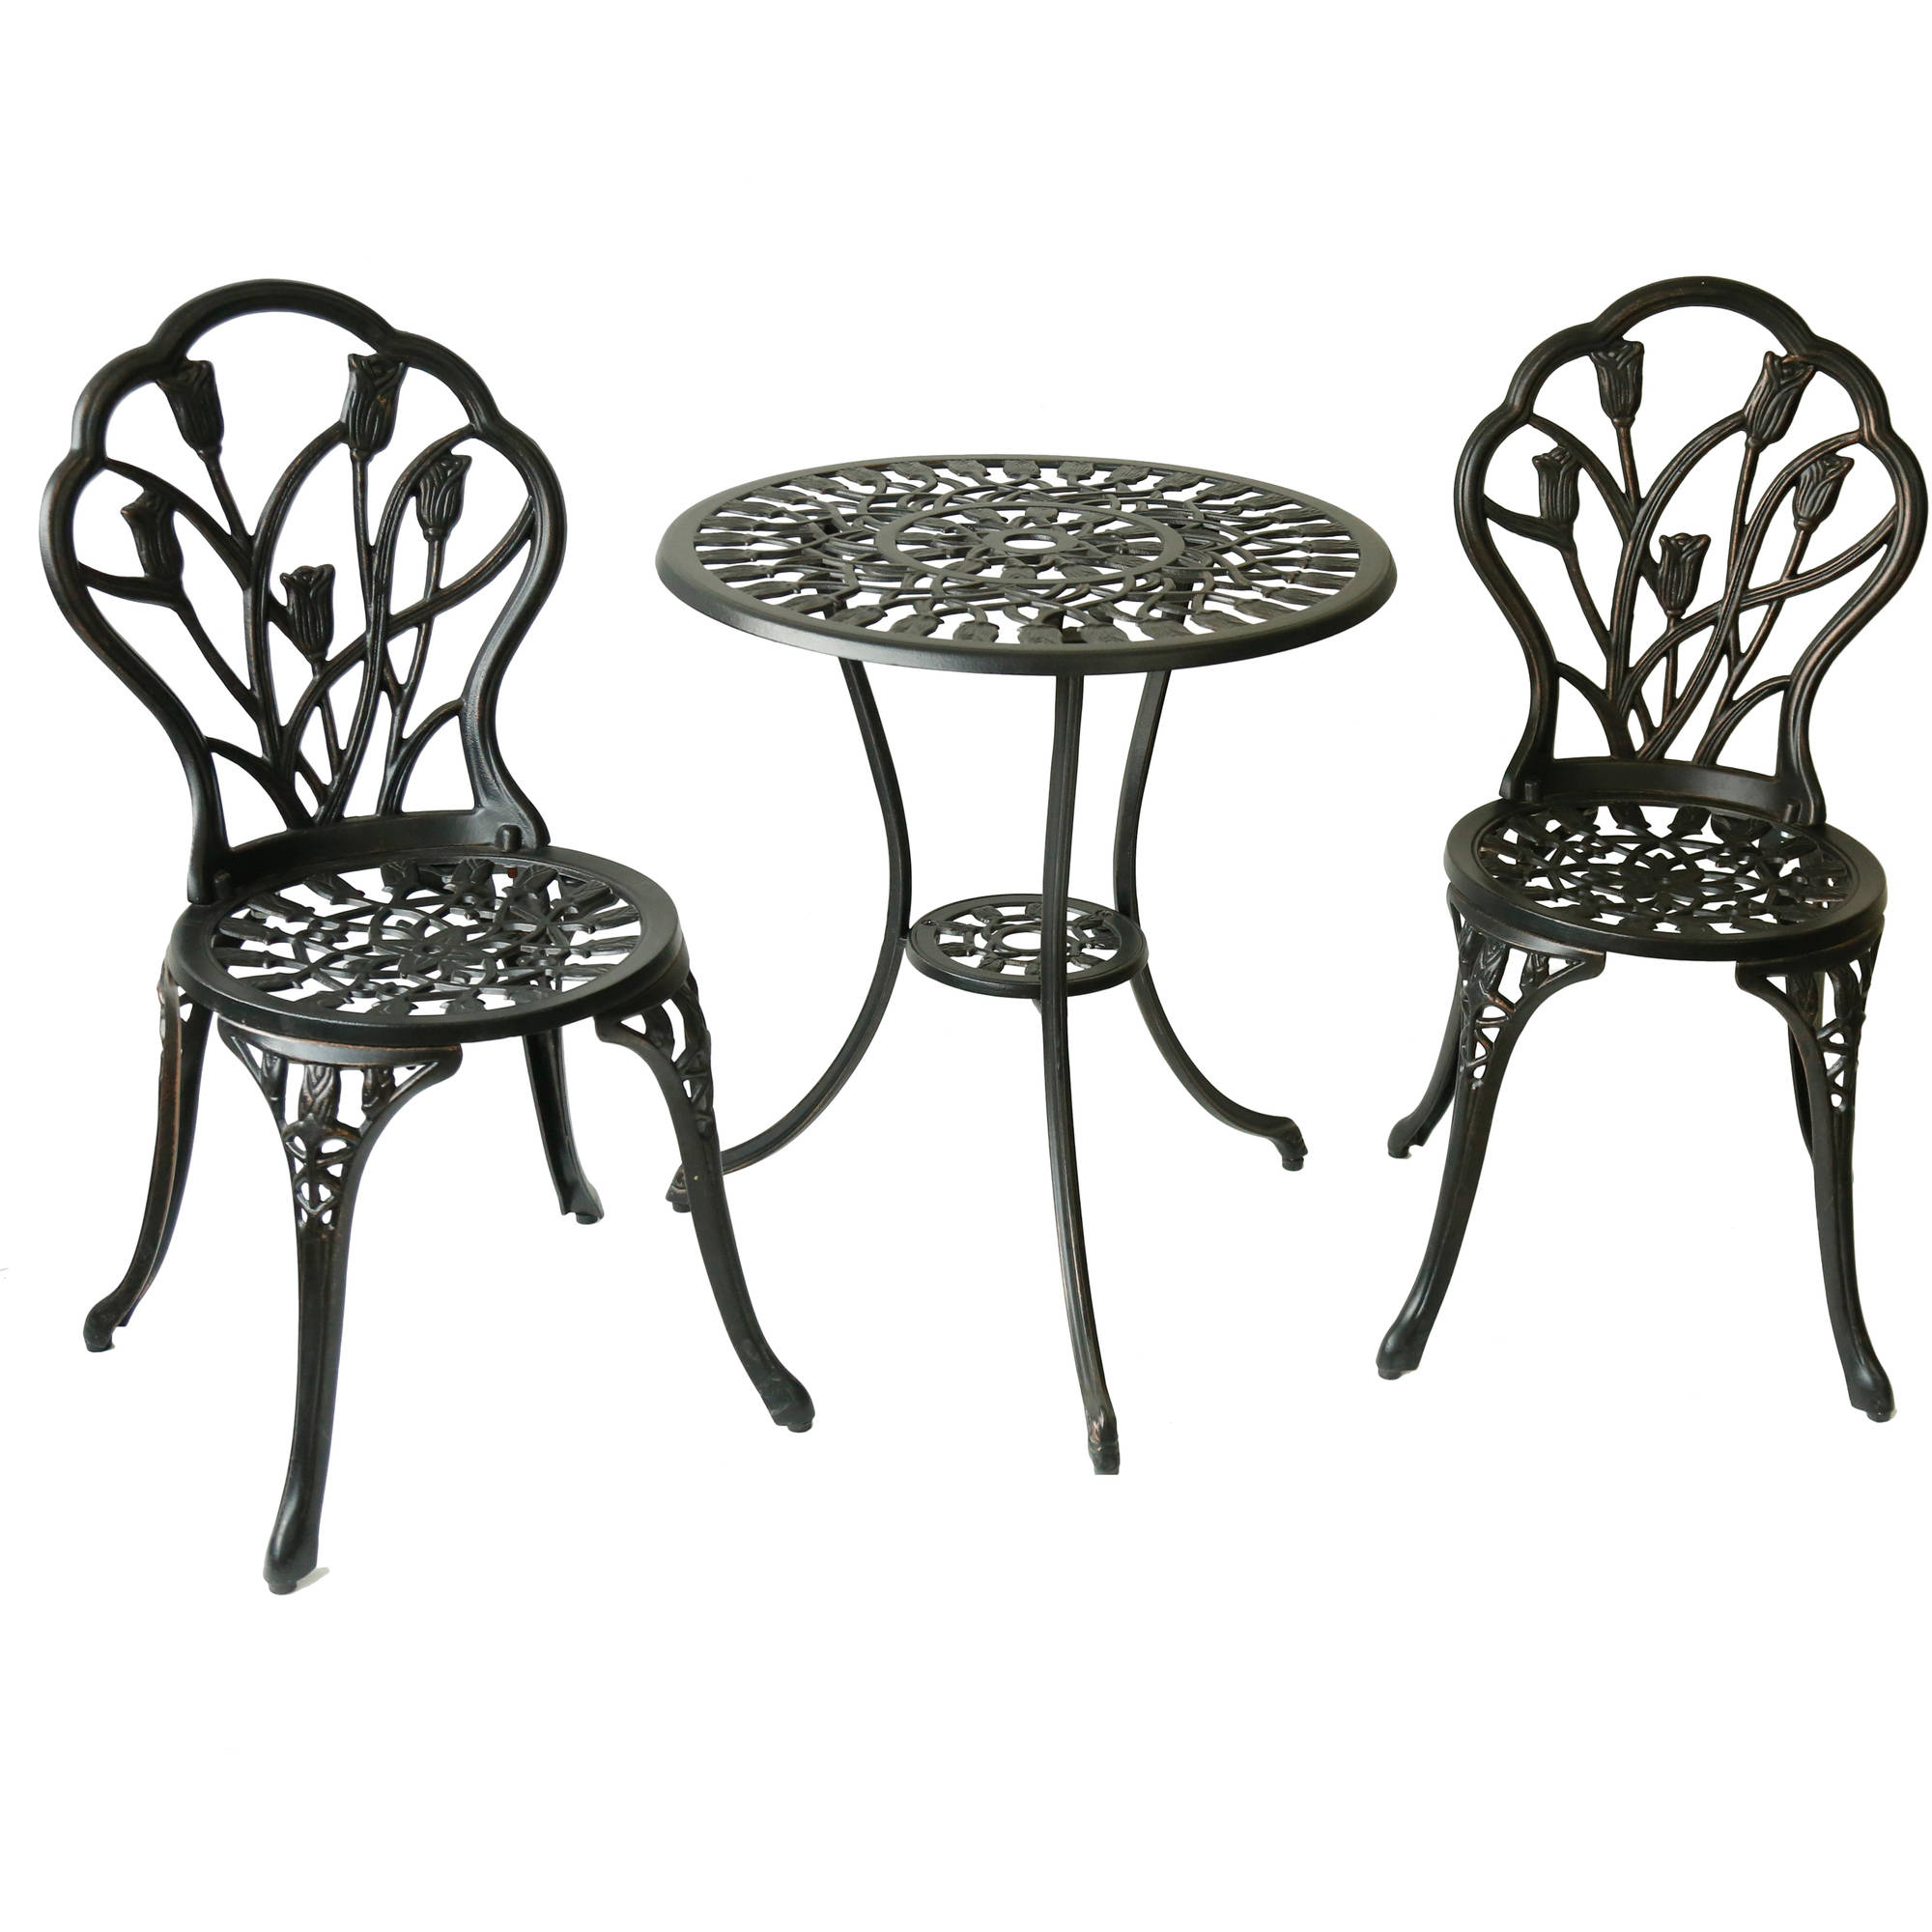 Better Homes and Gardens Tulip 3-Piece Outdoor Bistro Set - image 1 of 8